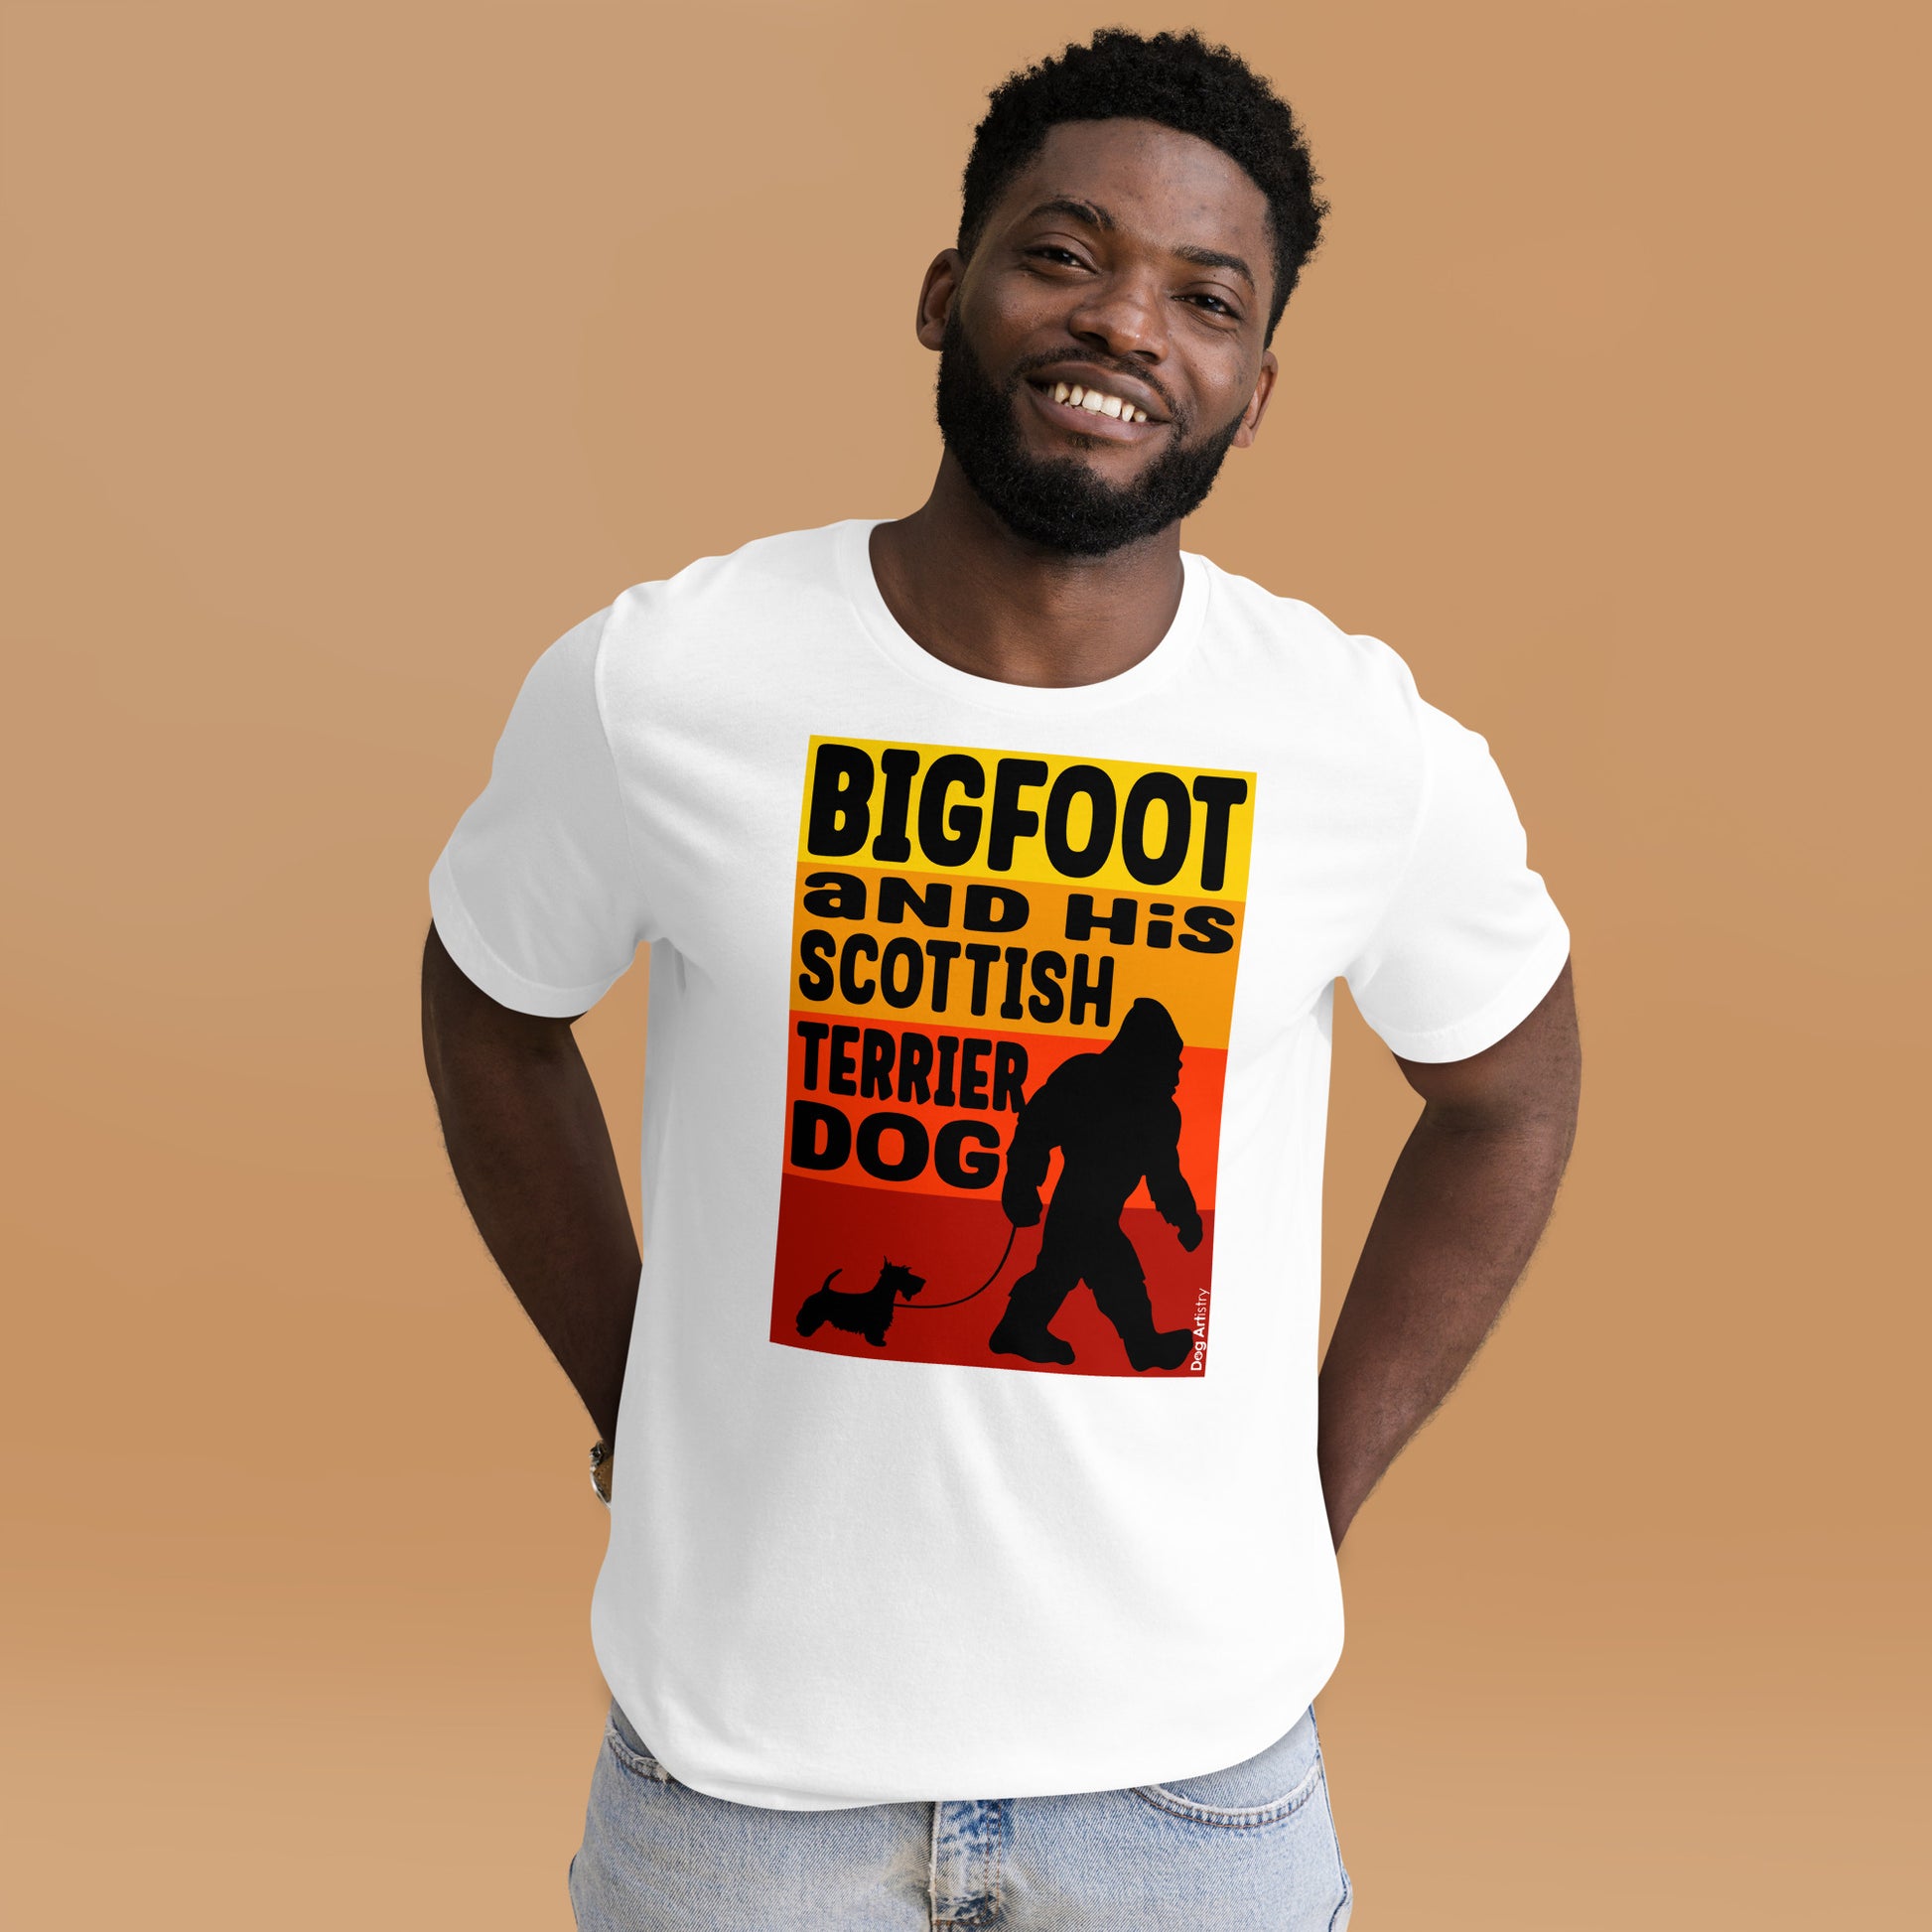 Bigfoot and his Scottish Terrier dog unisex white t-shirt by Dog Artistry.